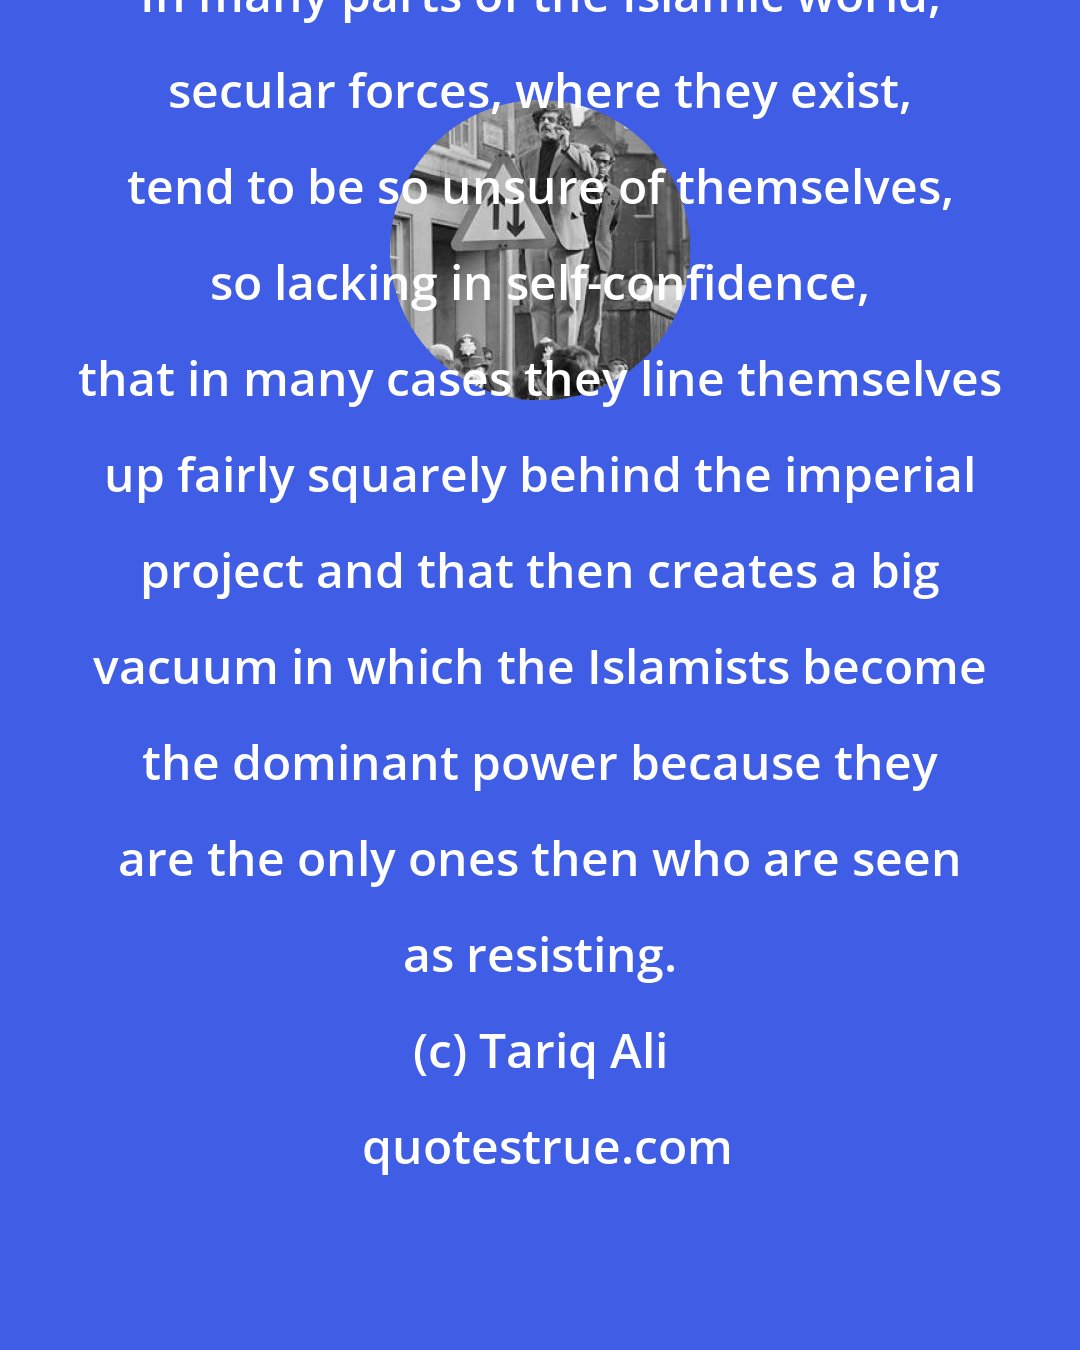 Tariq Ali: In many parts of the Islamic world, secular forces, where they exist, tend to be so unsure of themselves, so lacking in self-confidence, that in many cases they line themselves up fairly squarely behind the imperial project and that then creates a big vacuum in which the Islamists become the dominant power because they are the only ones then who are seen as resisting.